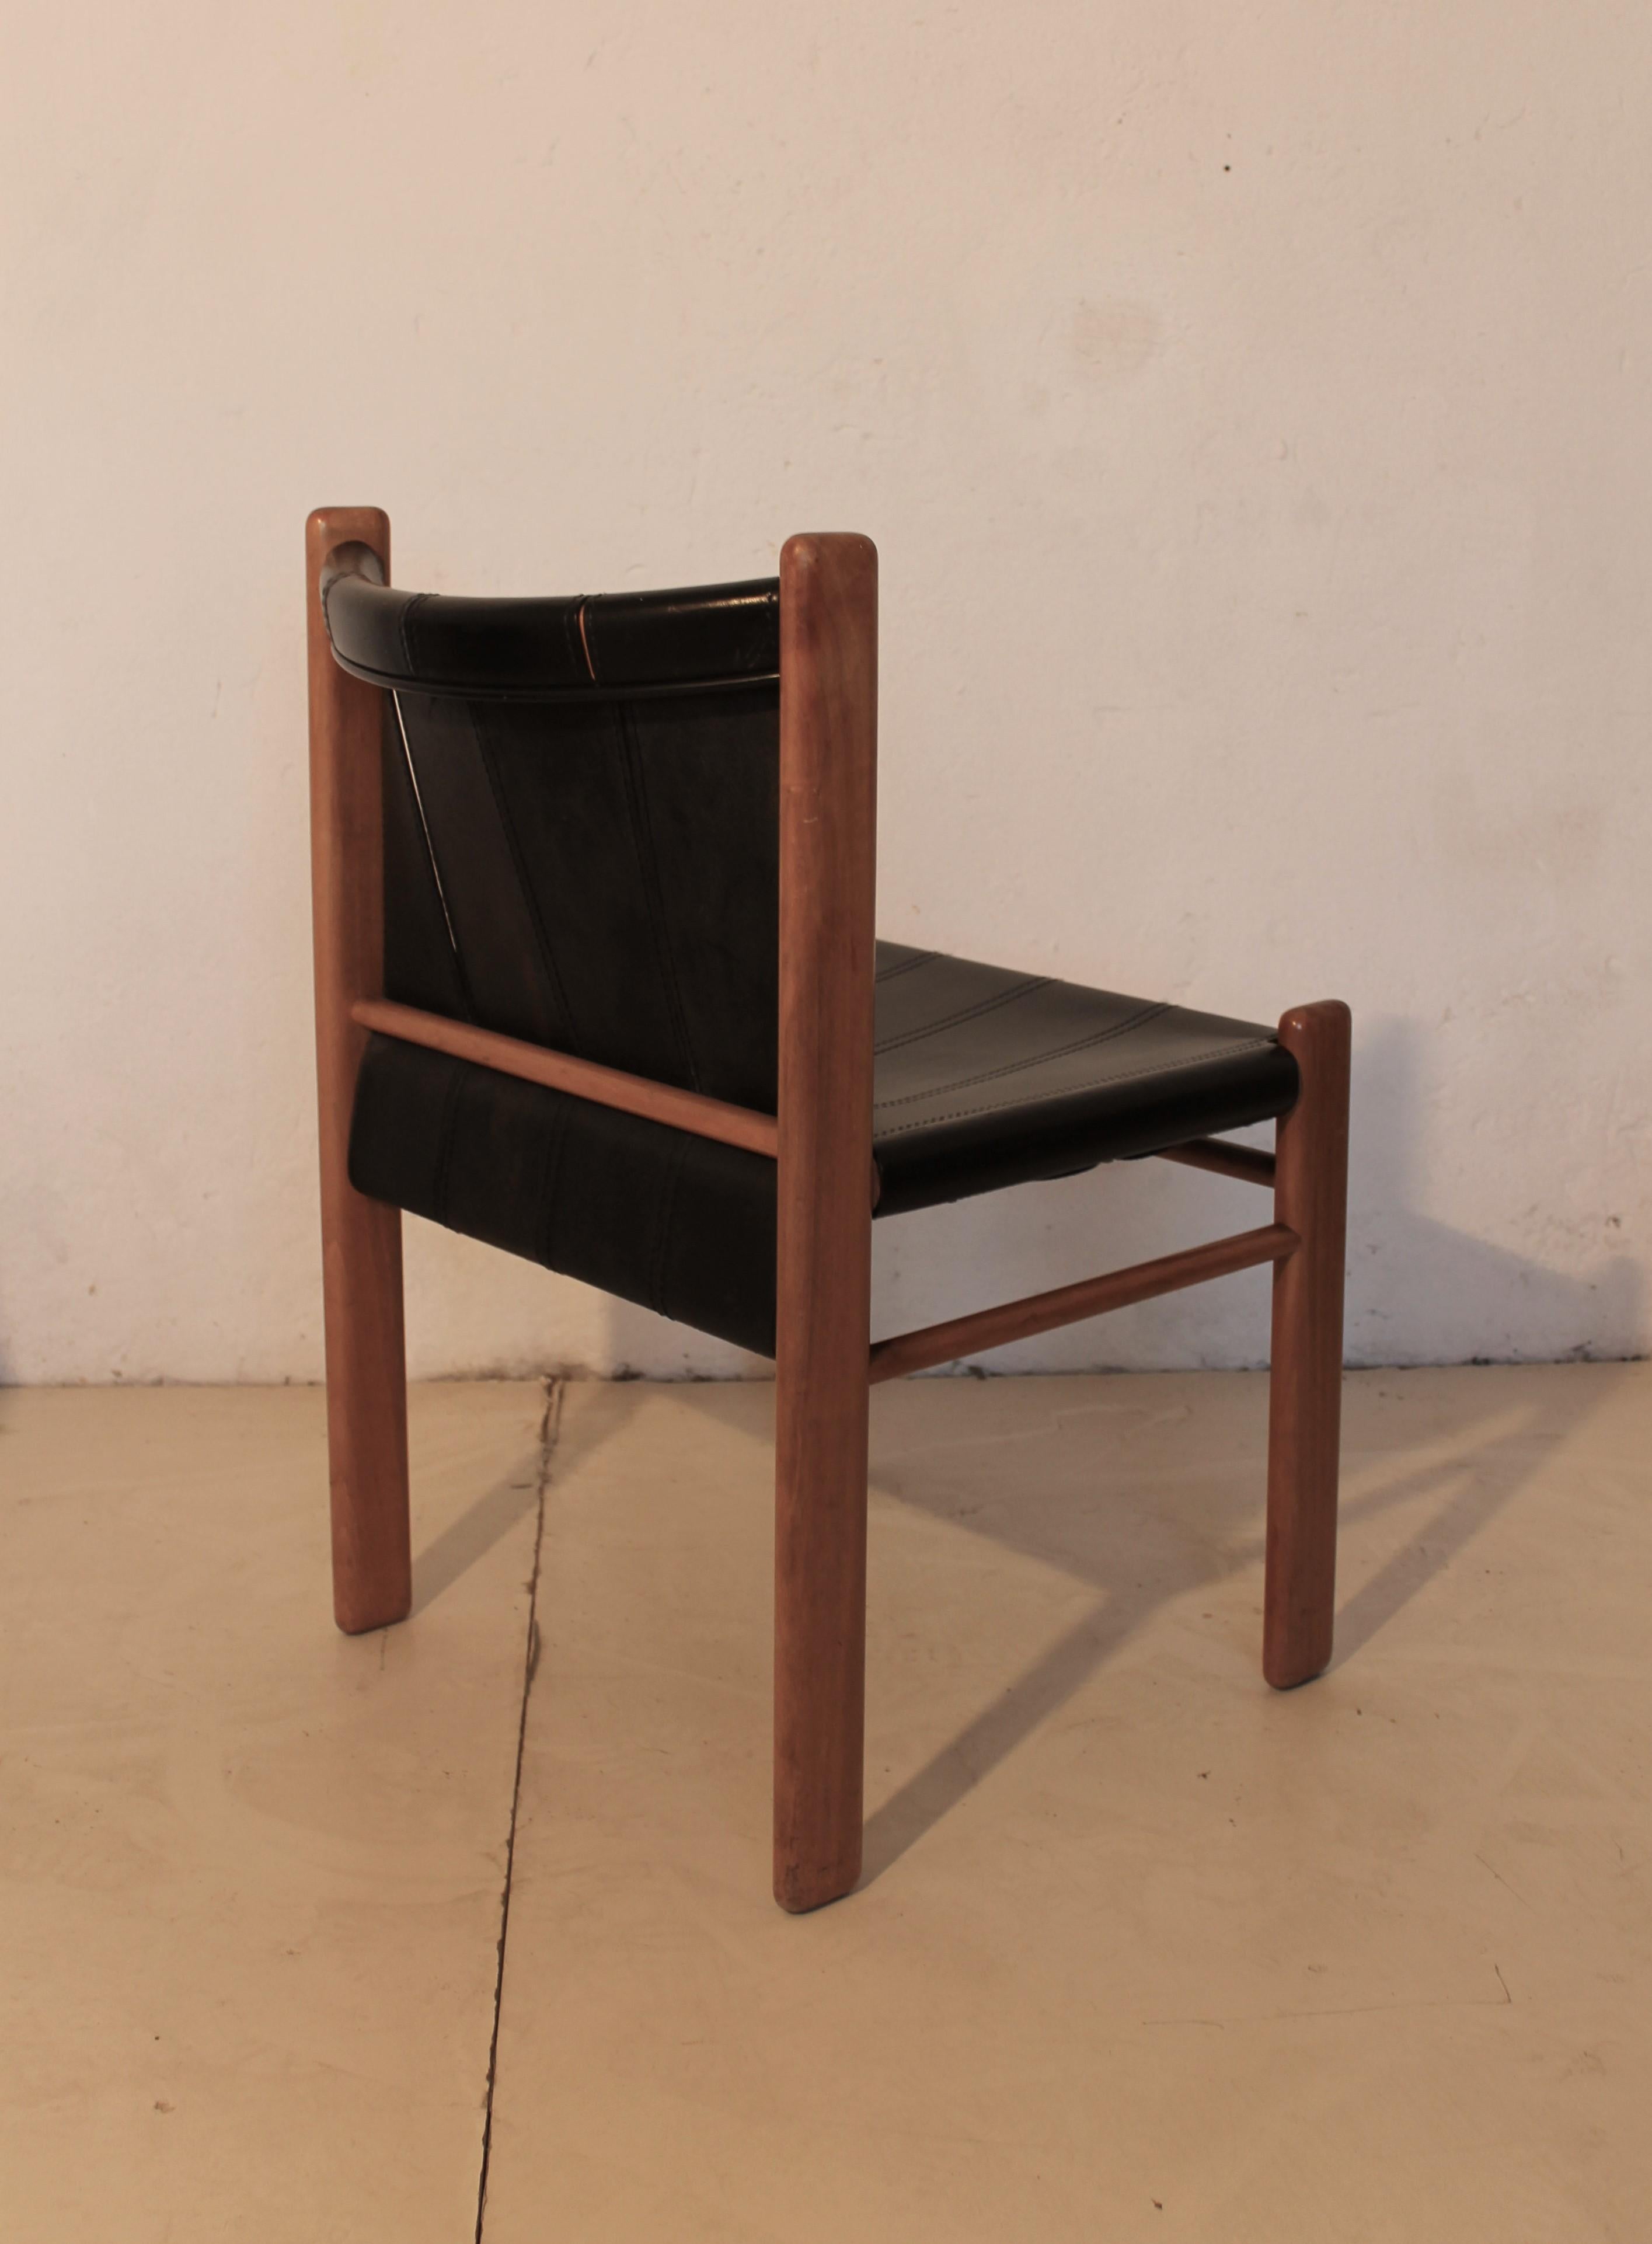 Gianfranco Frattini for Bernini   Walnut and Black Leather Chairs, Italy 1981 In Good Condition For Sale In Sacile, PN